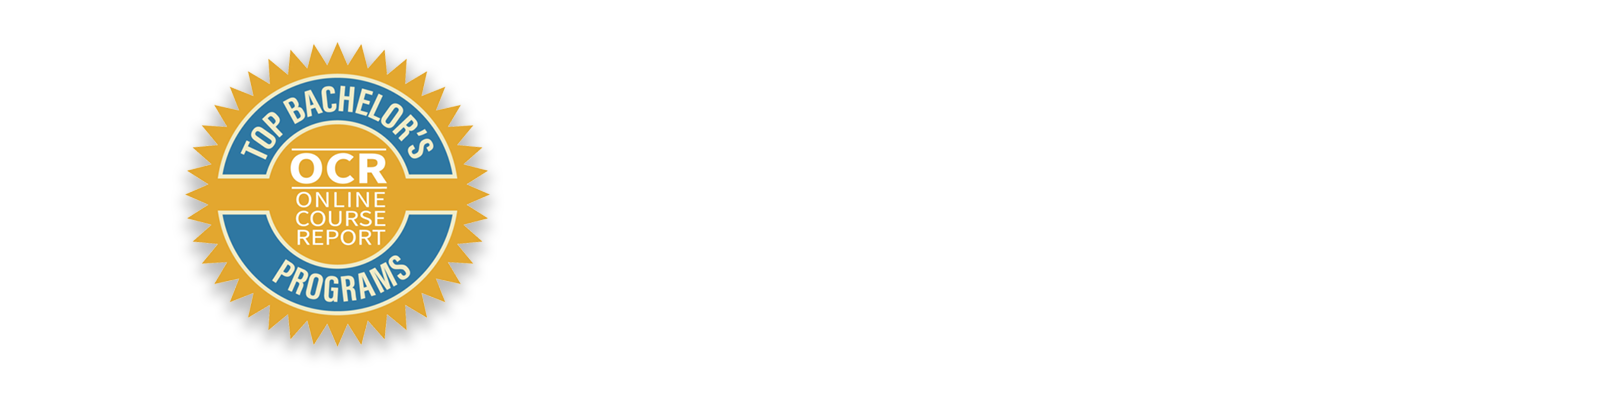 New OCR Ranking Lists Nicholls Online English No. 2 For Best Online Bachelor's Degrees in the Country, 2020